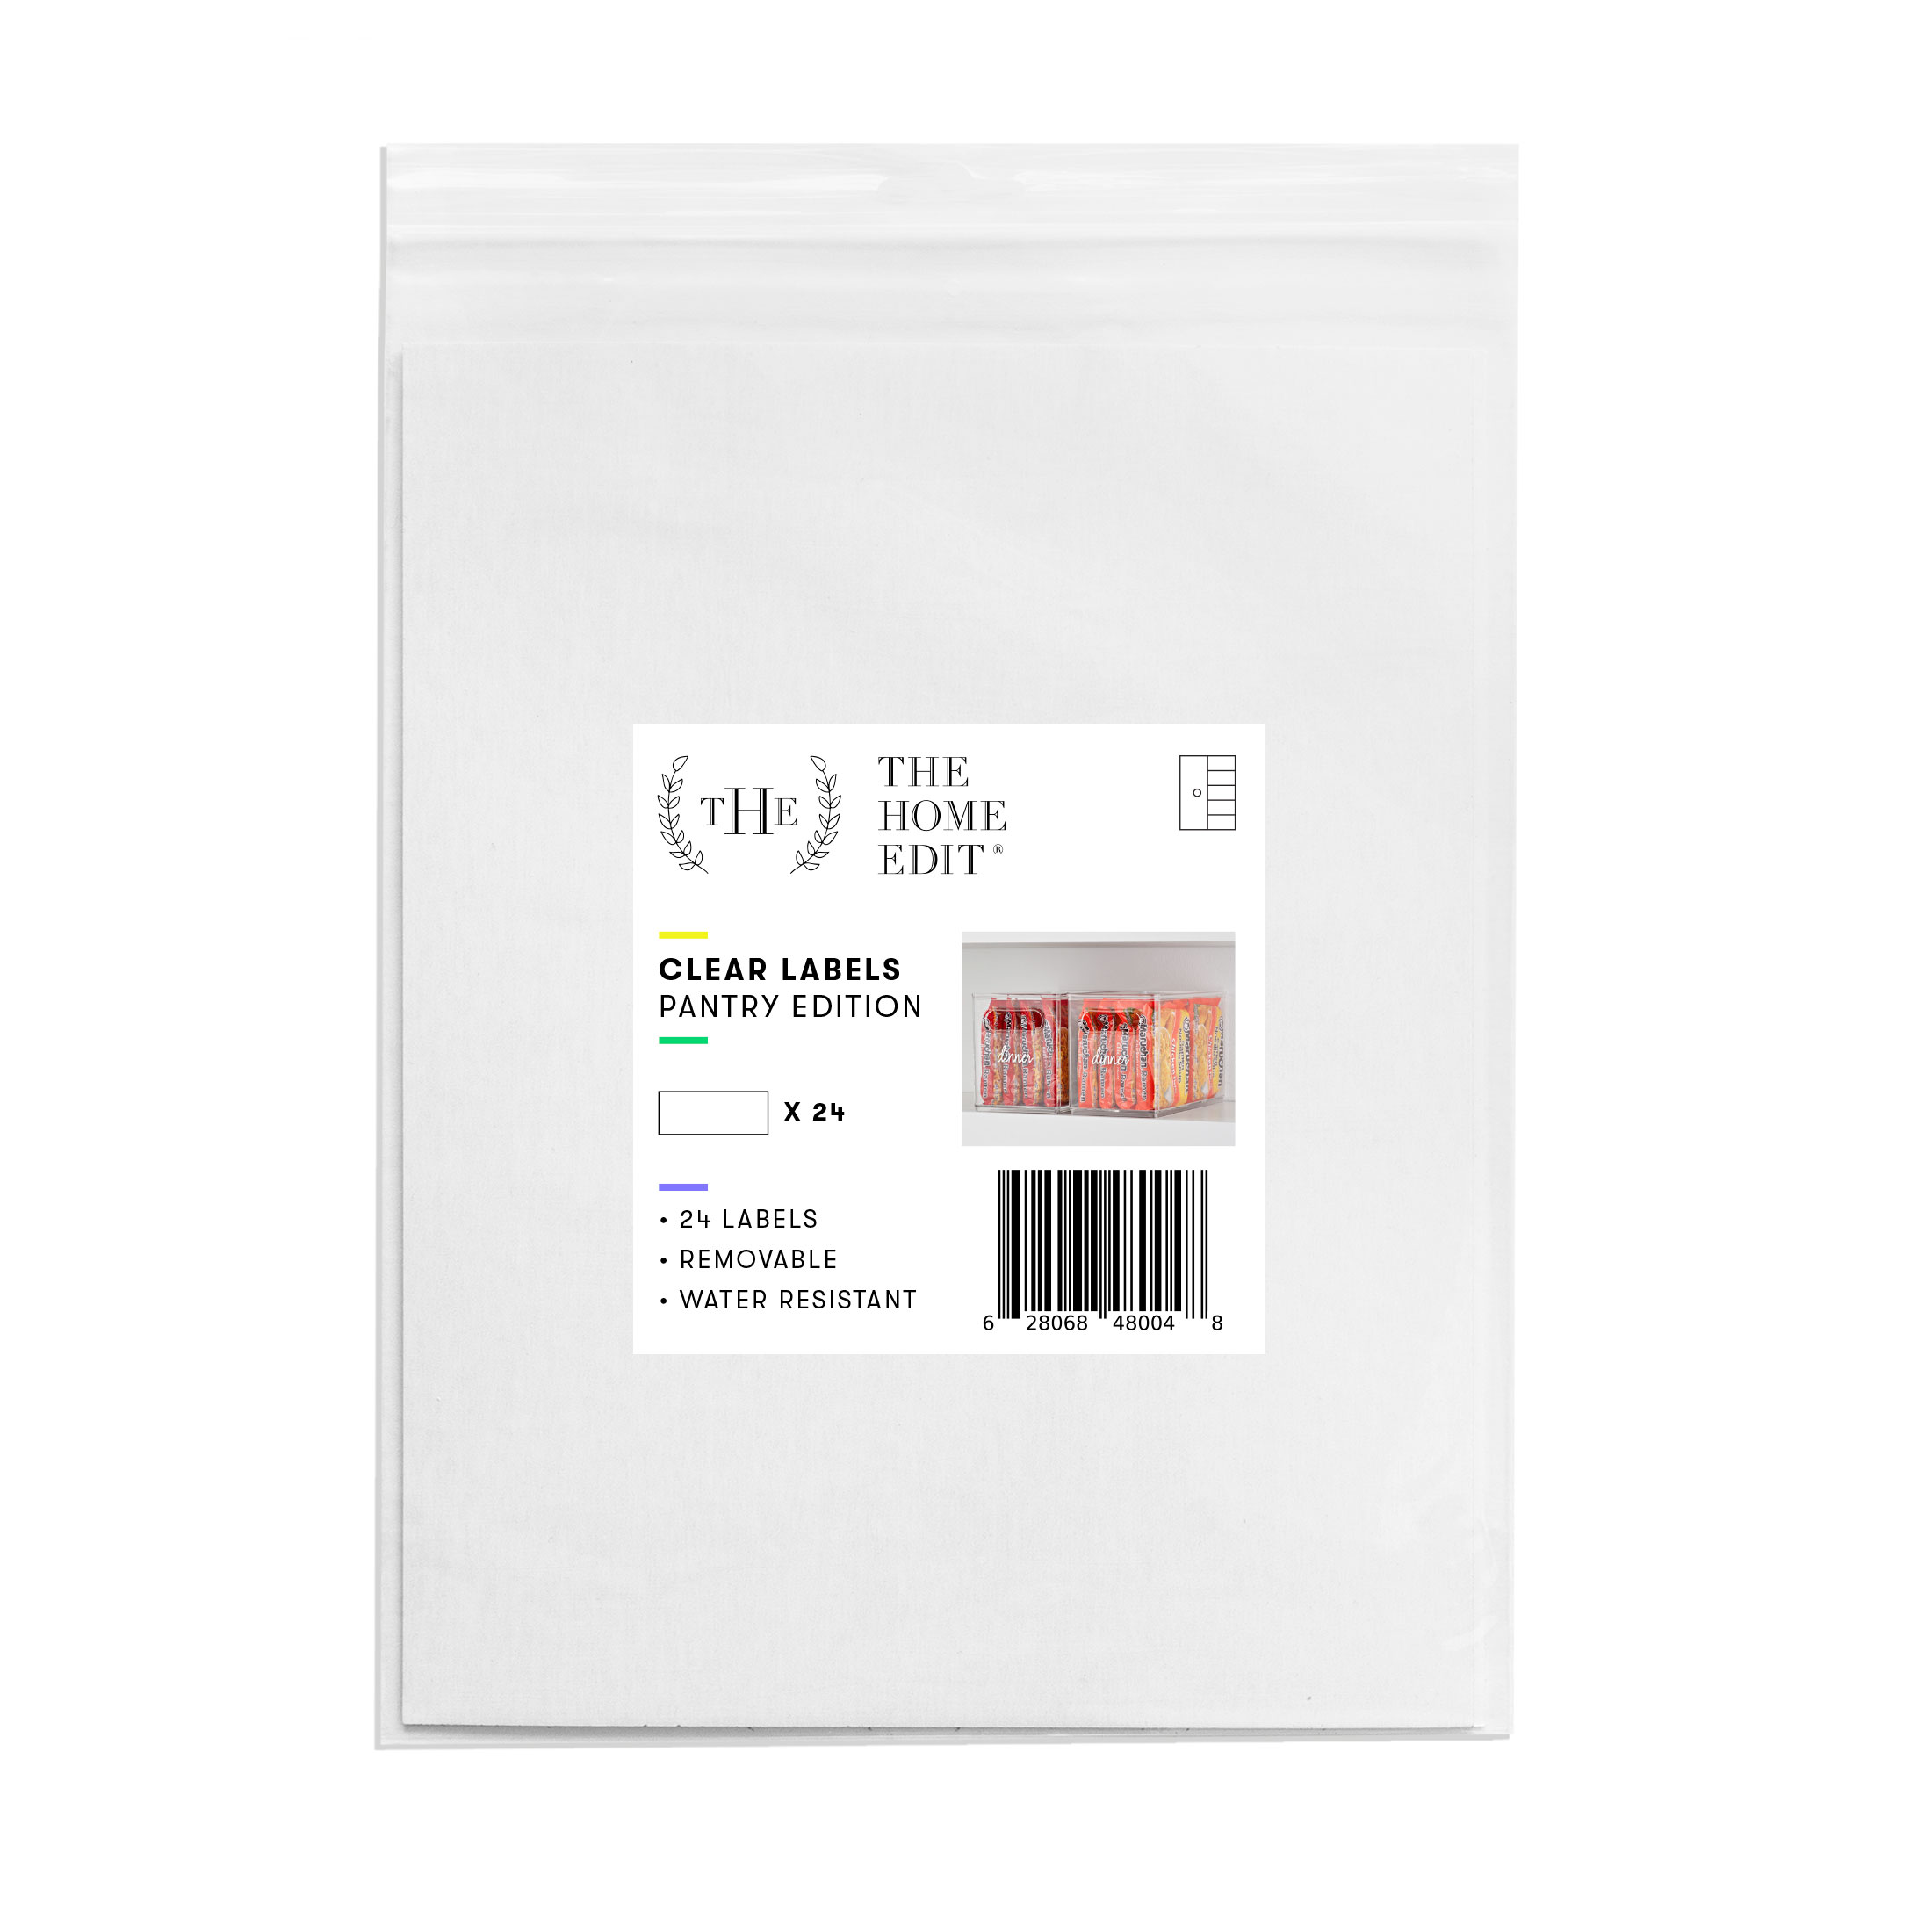 The Home Edit Clear Pantry Labels, Pack of 24 - image 2 of 7